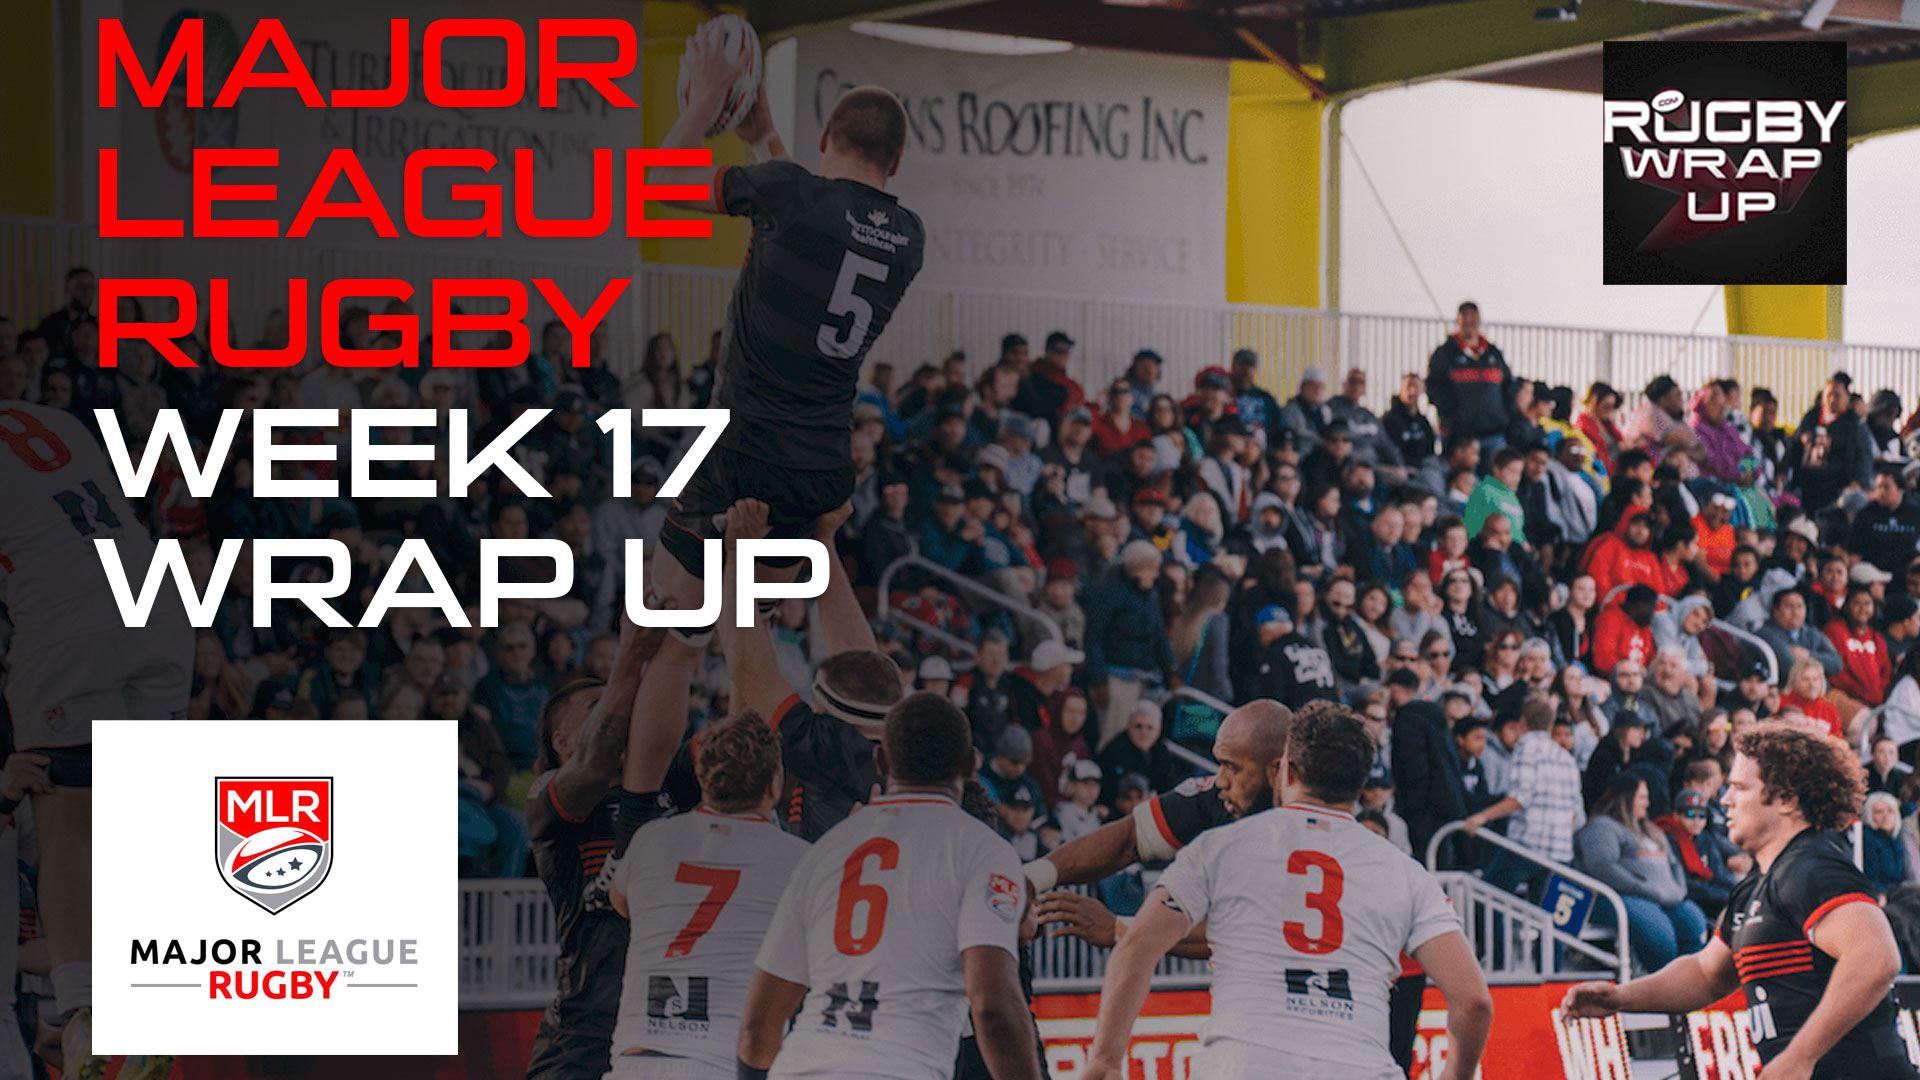 Major_League_Rugby, Rugby_Wrap_Up, Bryan_Ray, Matt_McCarthy